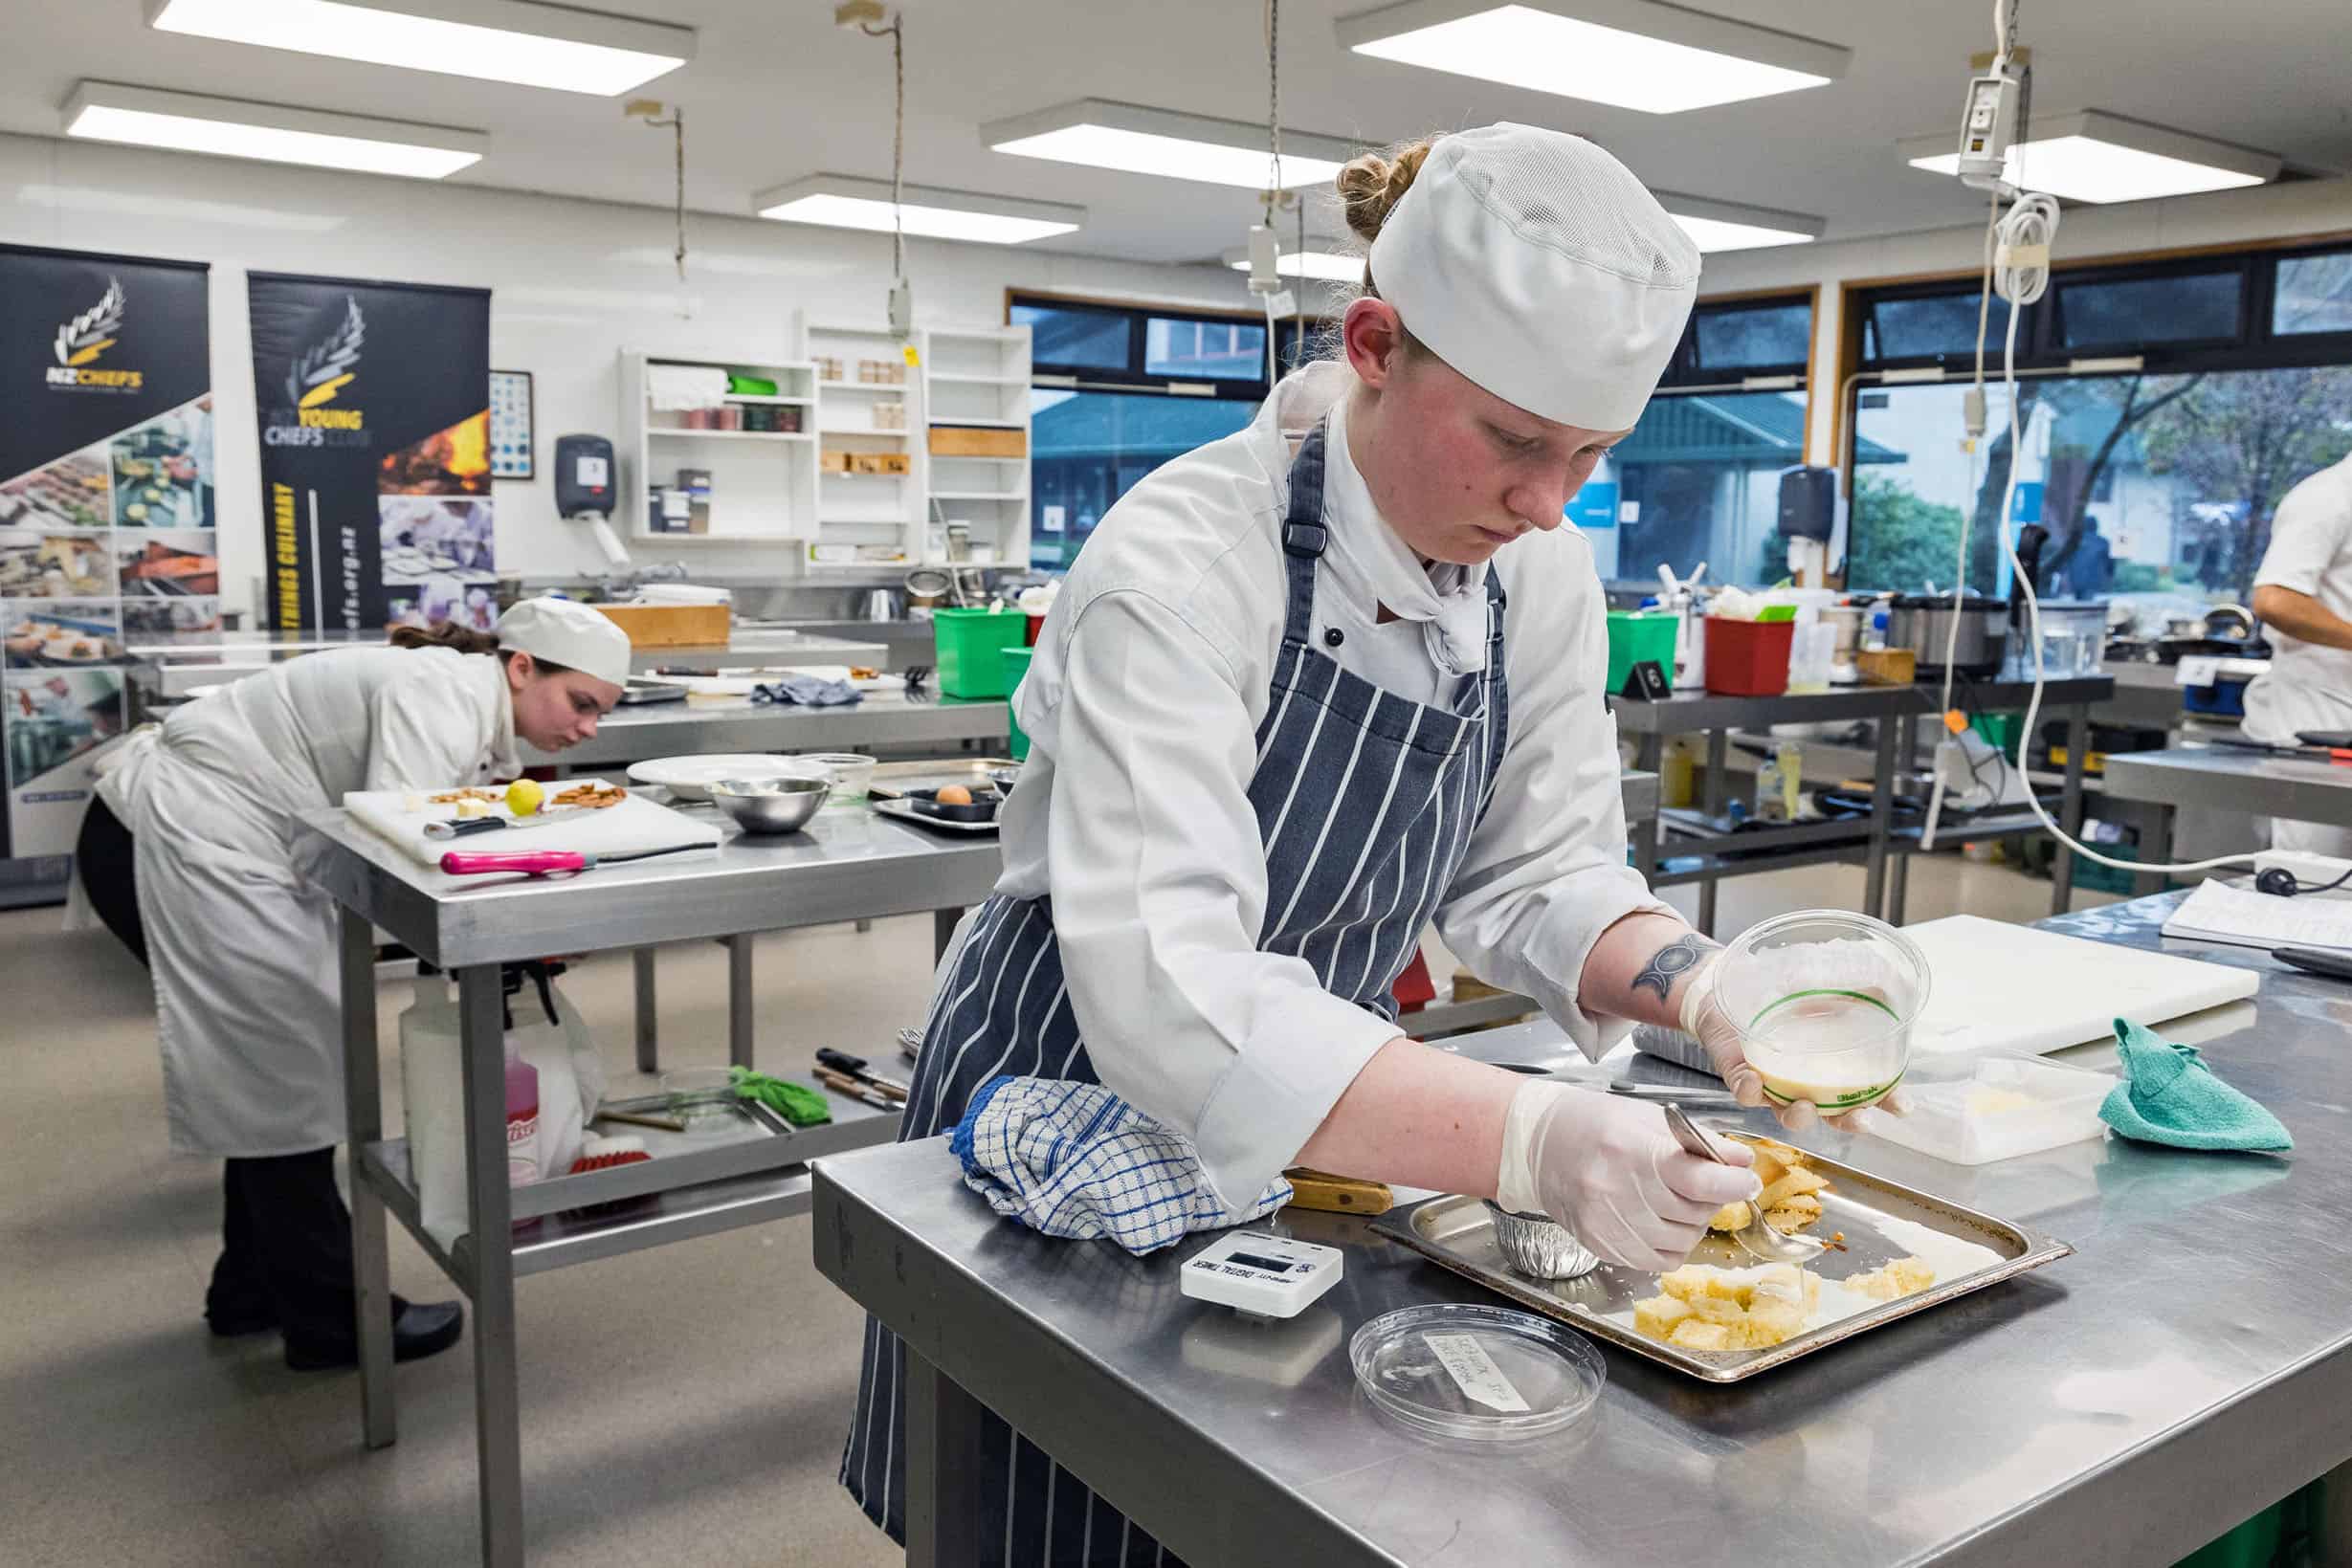 Trainee chefs compete at an industry cooking competition at Ara Christchurch.